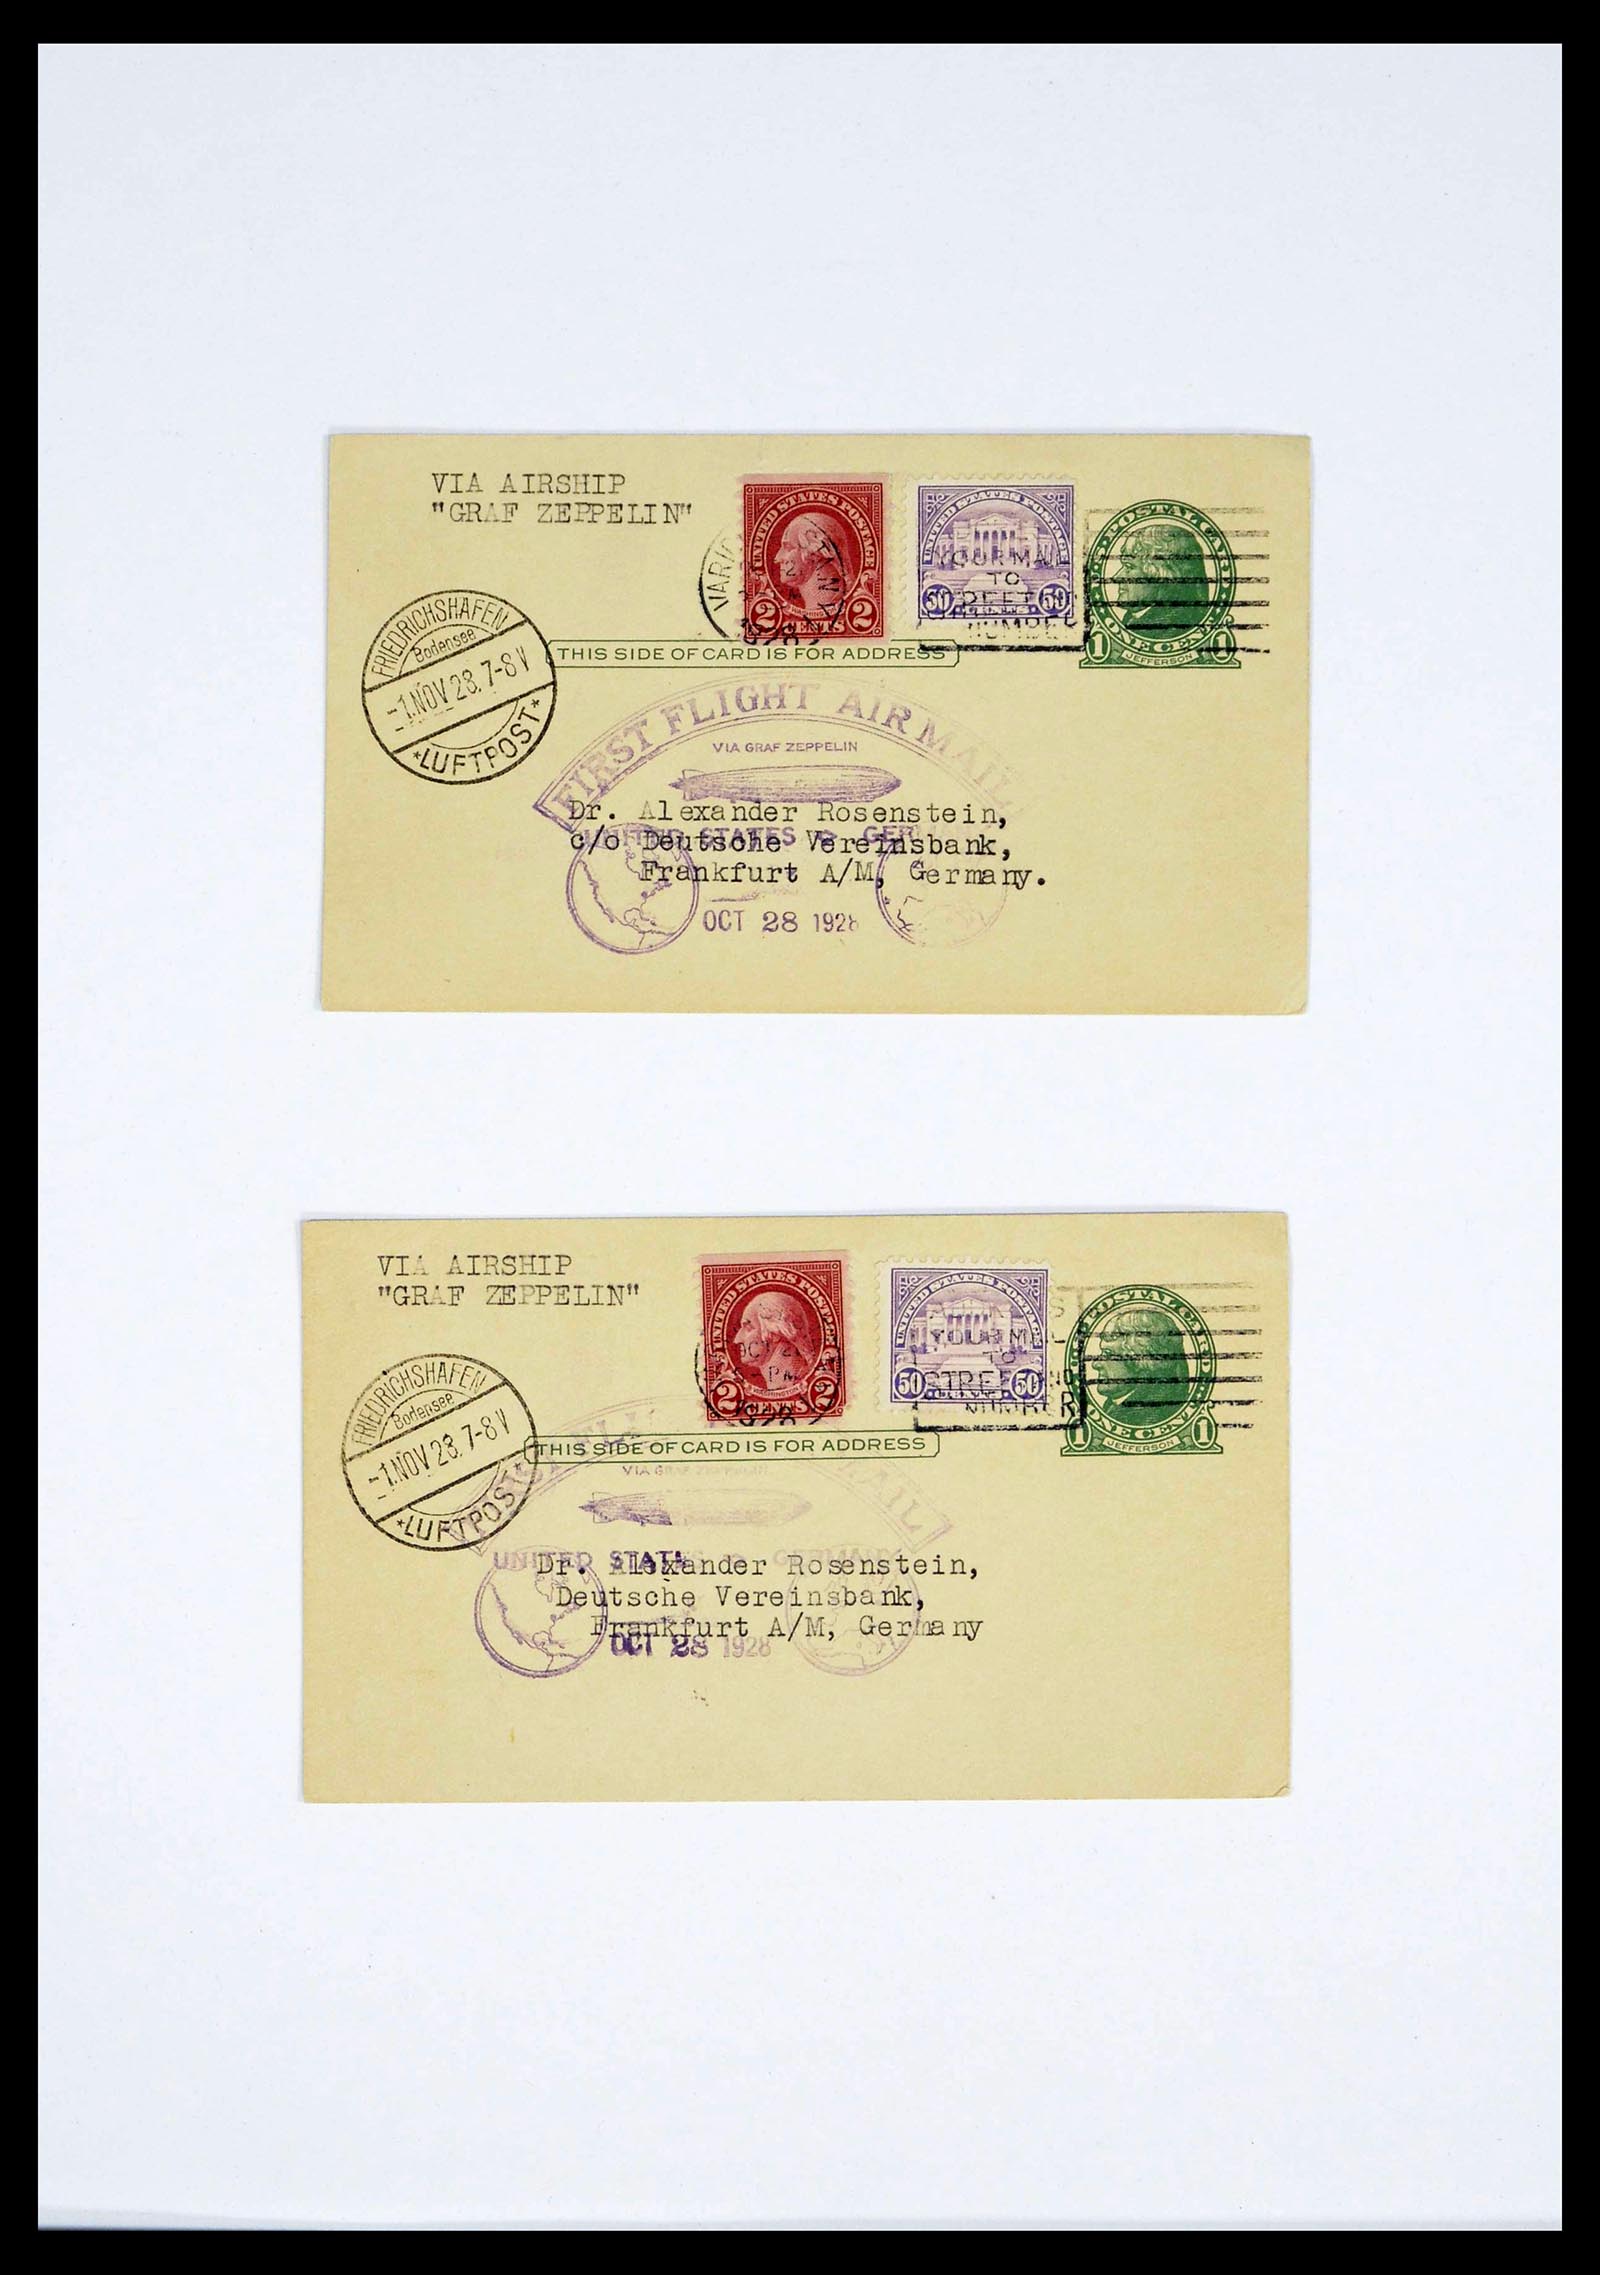 39032 0001 - Stamp collection 39032 Zeppelin covers 1928-1933.